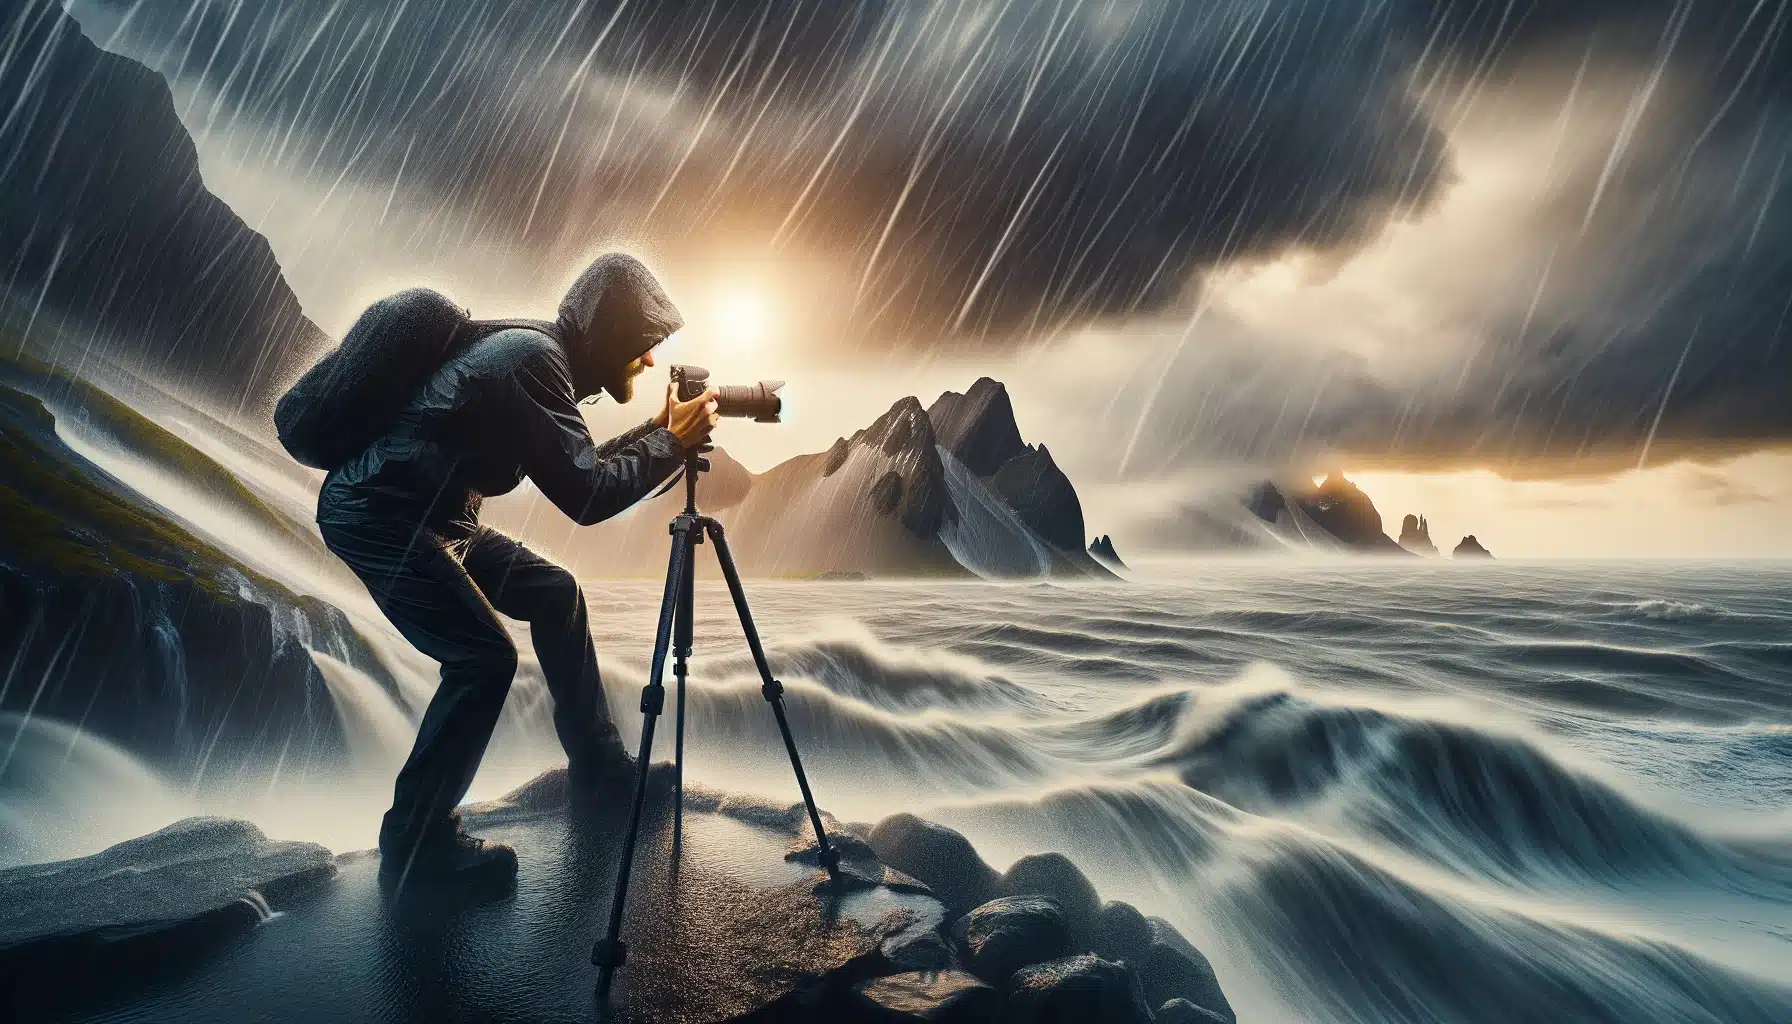 Photographer adjusting camera on a tripod in difficult weather conditions with a dramatic landscape in the background